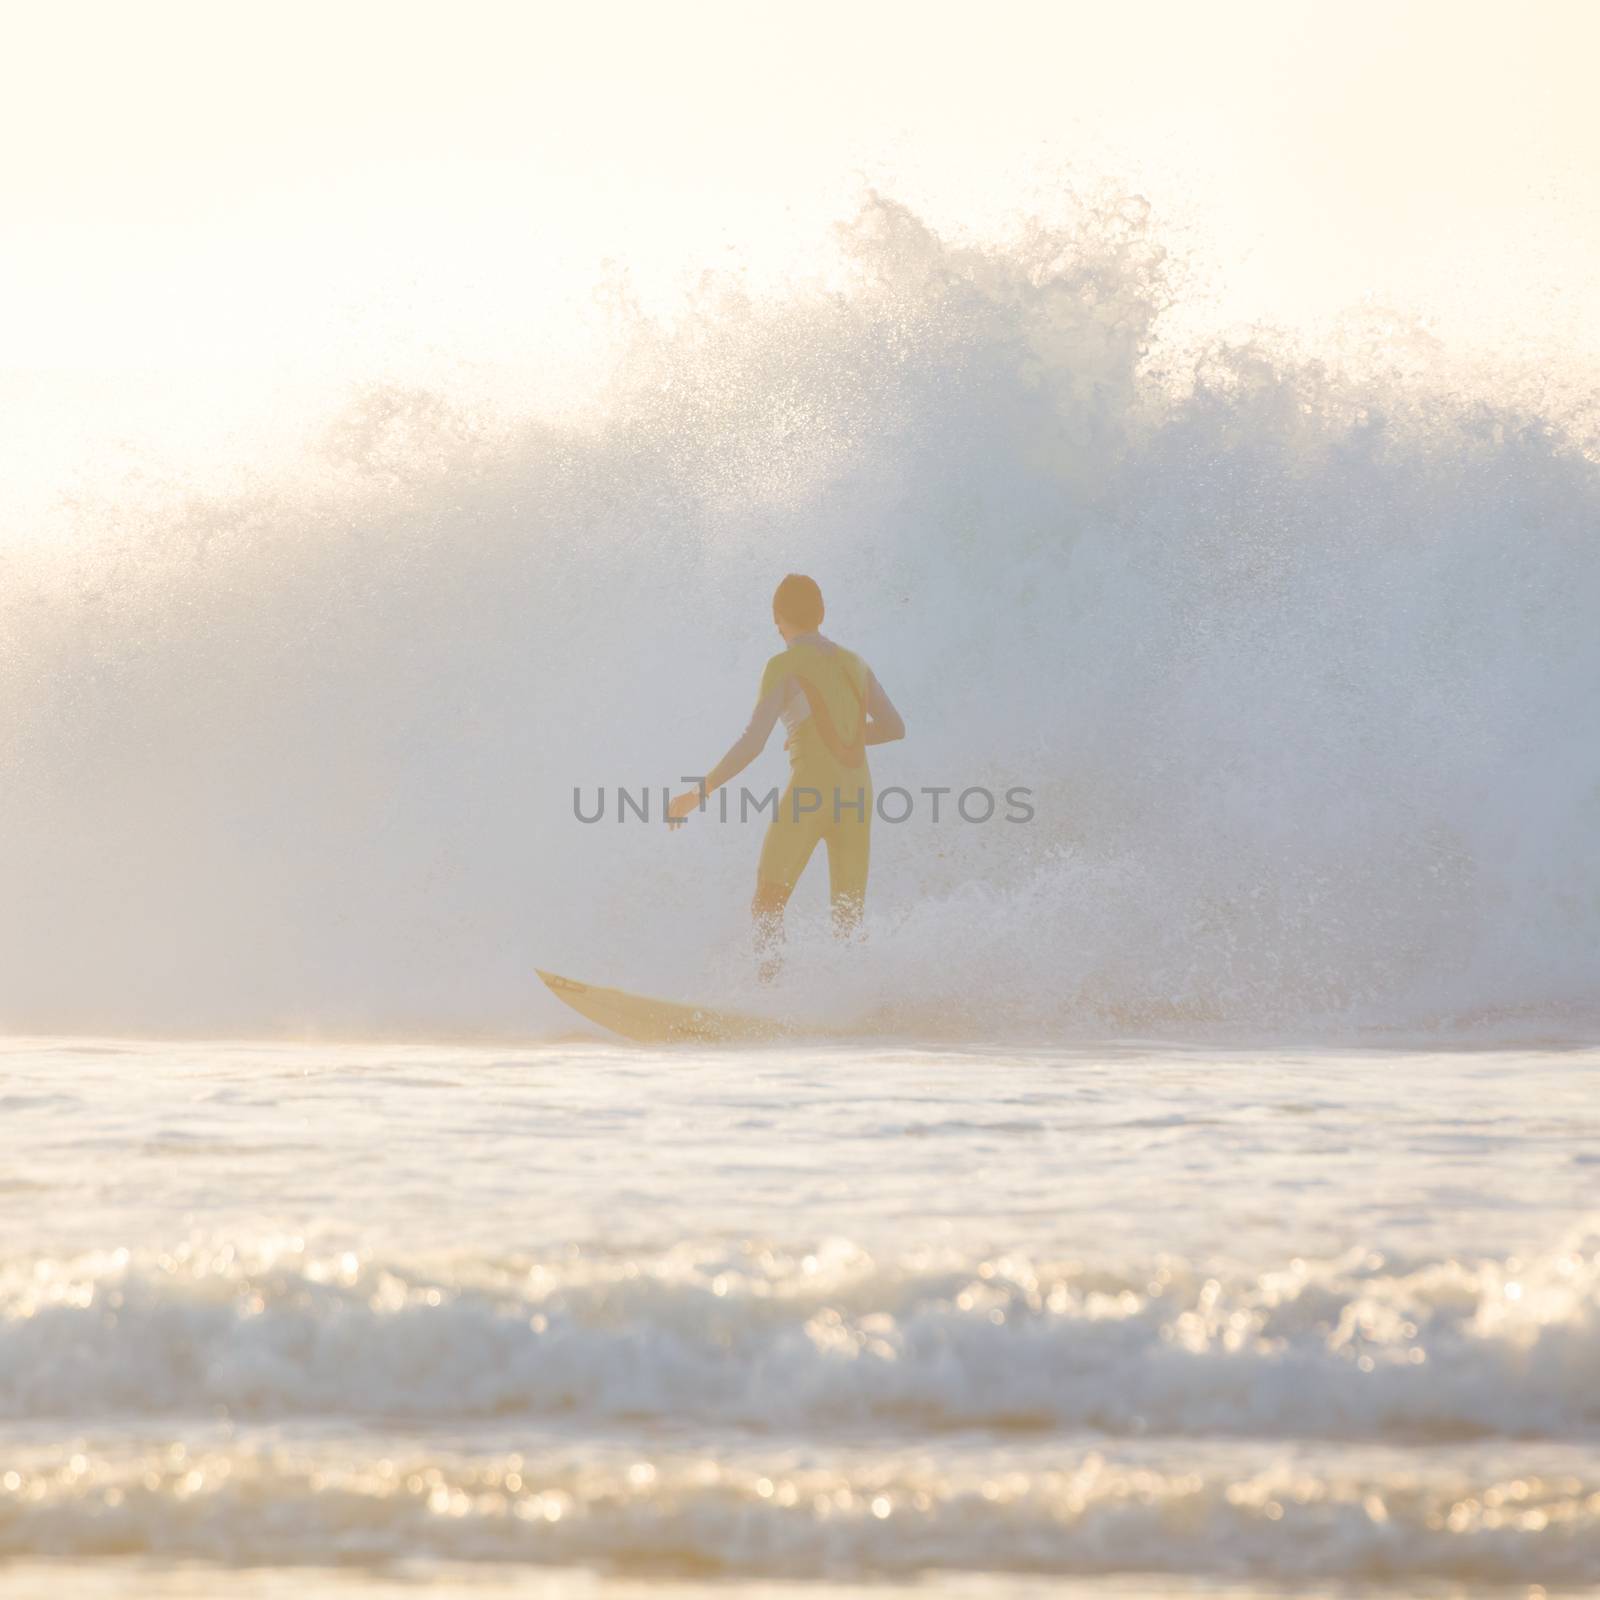 Surfer riding a powerful wave. Square composition.